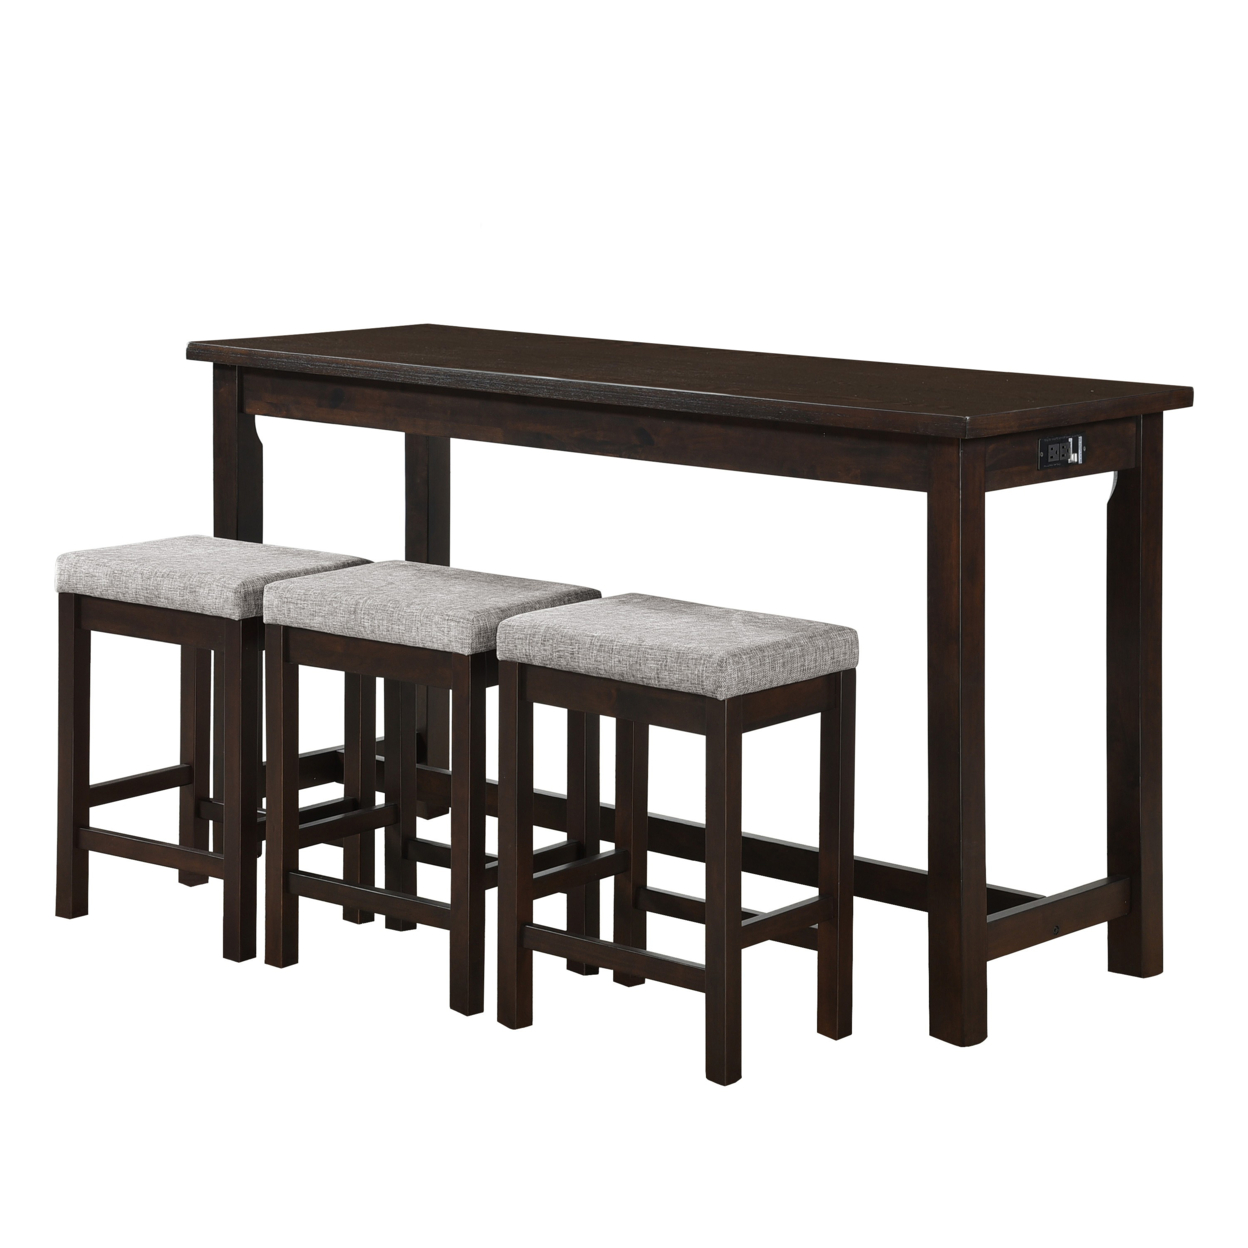 1 Drawer Counter Height Table With Backless Stools,Set Of 4,Brown And Gray- Saltoro Sherpi